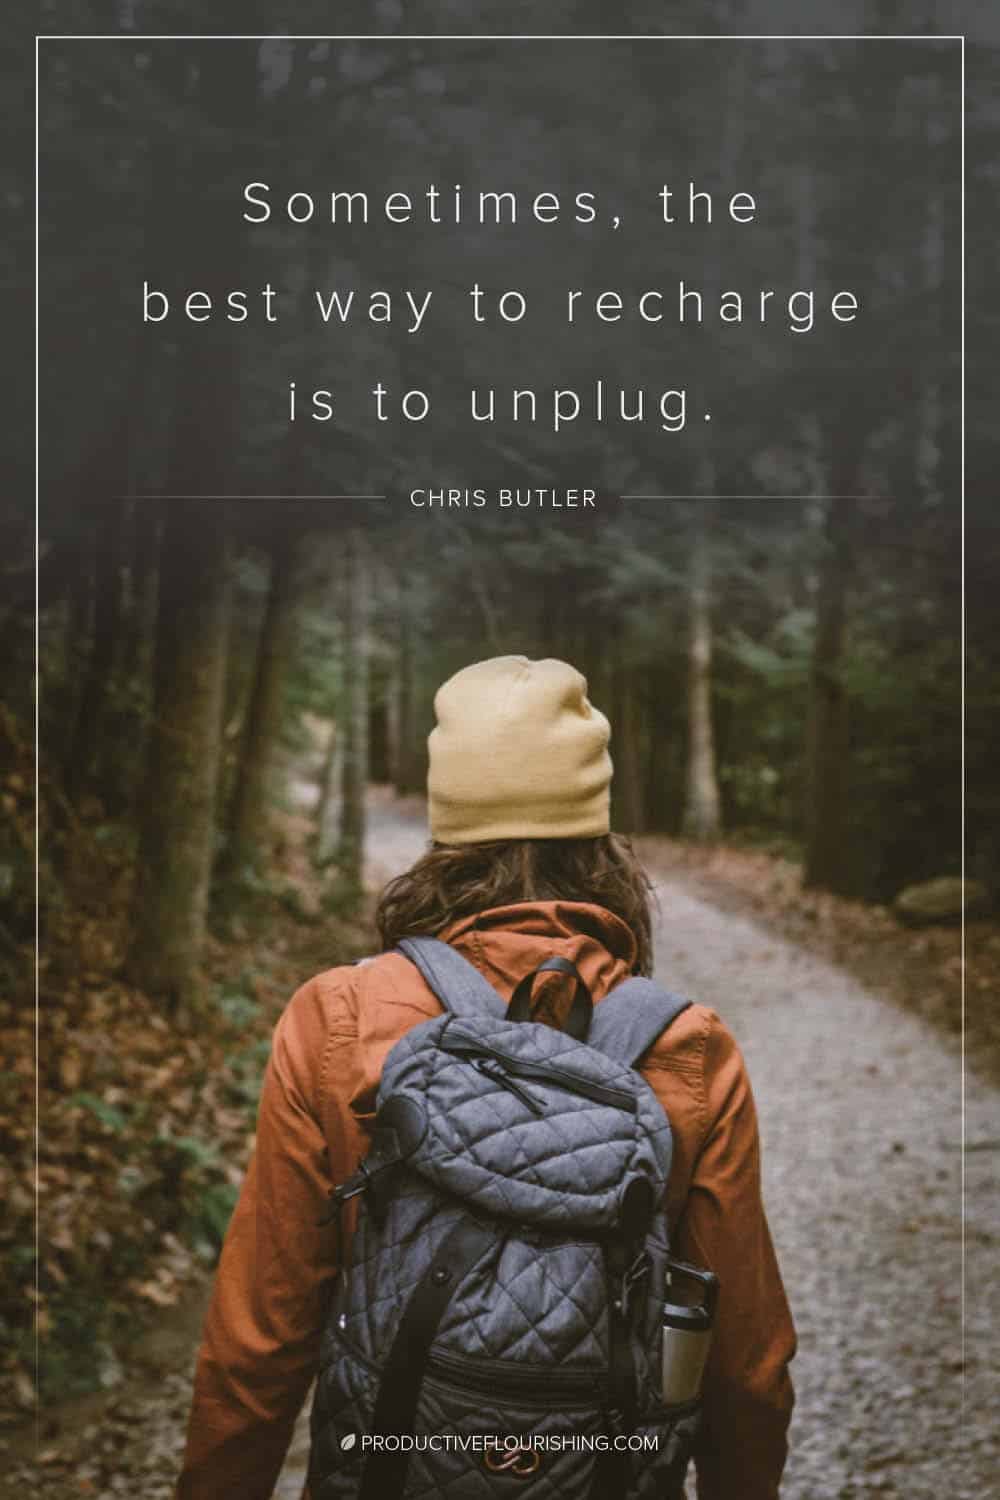 Sometimes the best way to recharge is to unplug. Here are 7 ways you can recharge by unplugging from the Internet. #recharge #unplugtheinternet #productiveflourishing